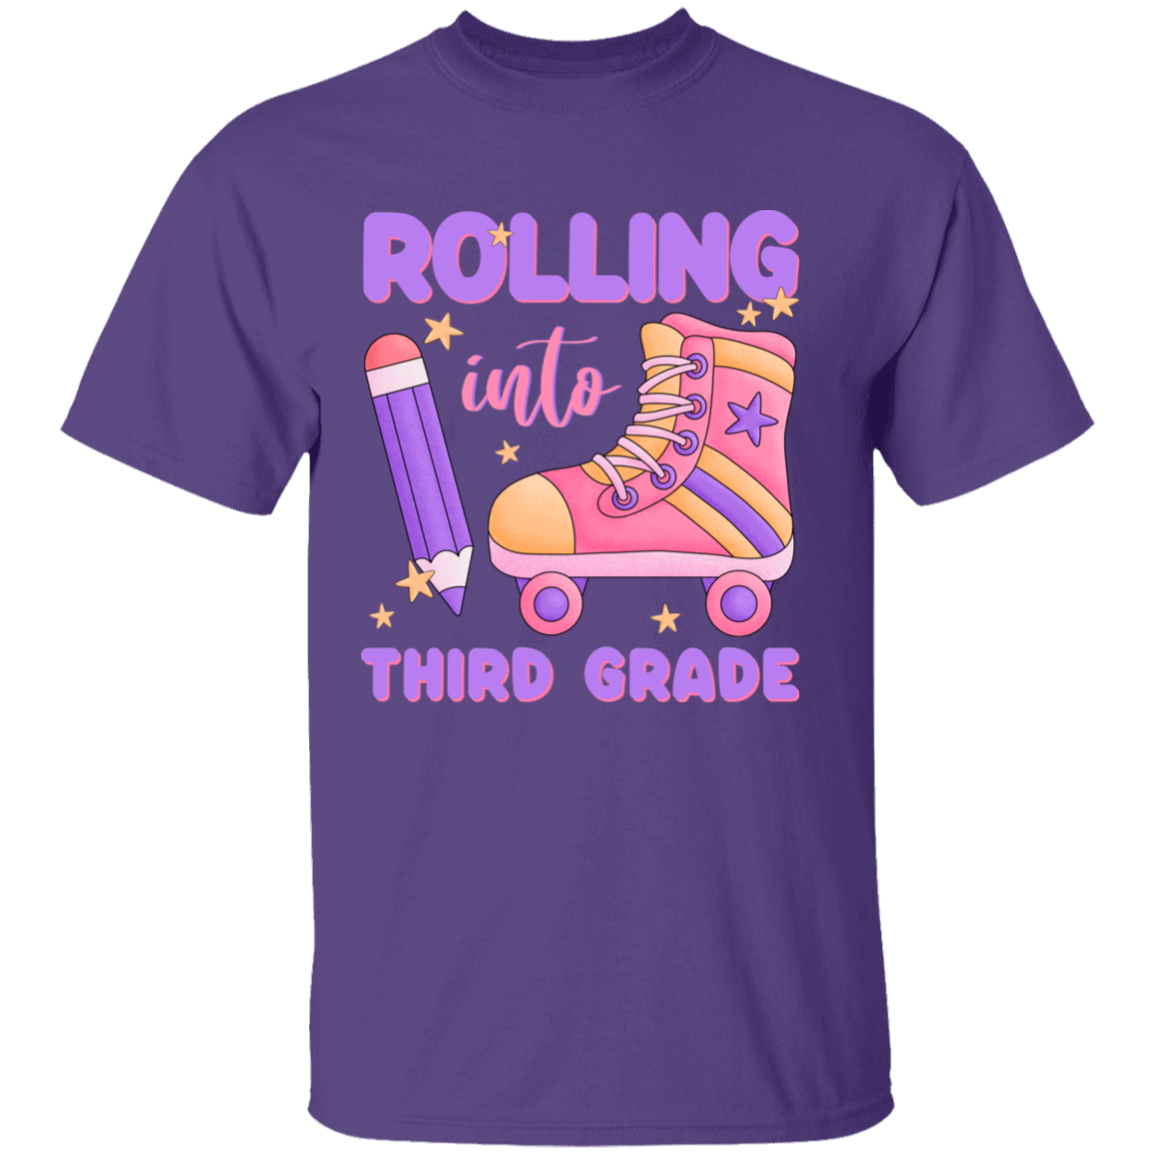 Rolling into Third Grade Youth Cotton T-Shirt